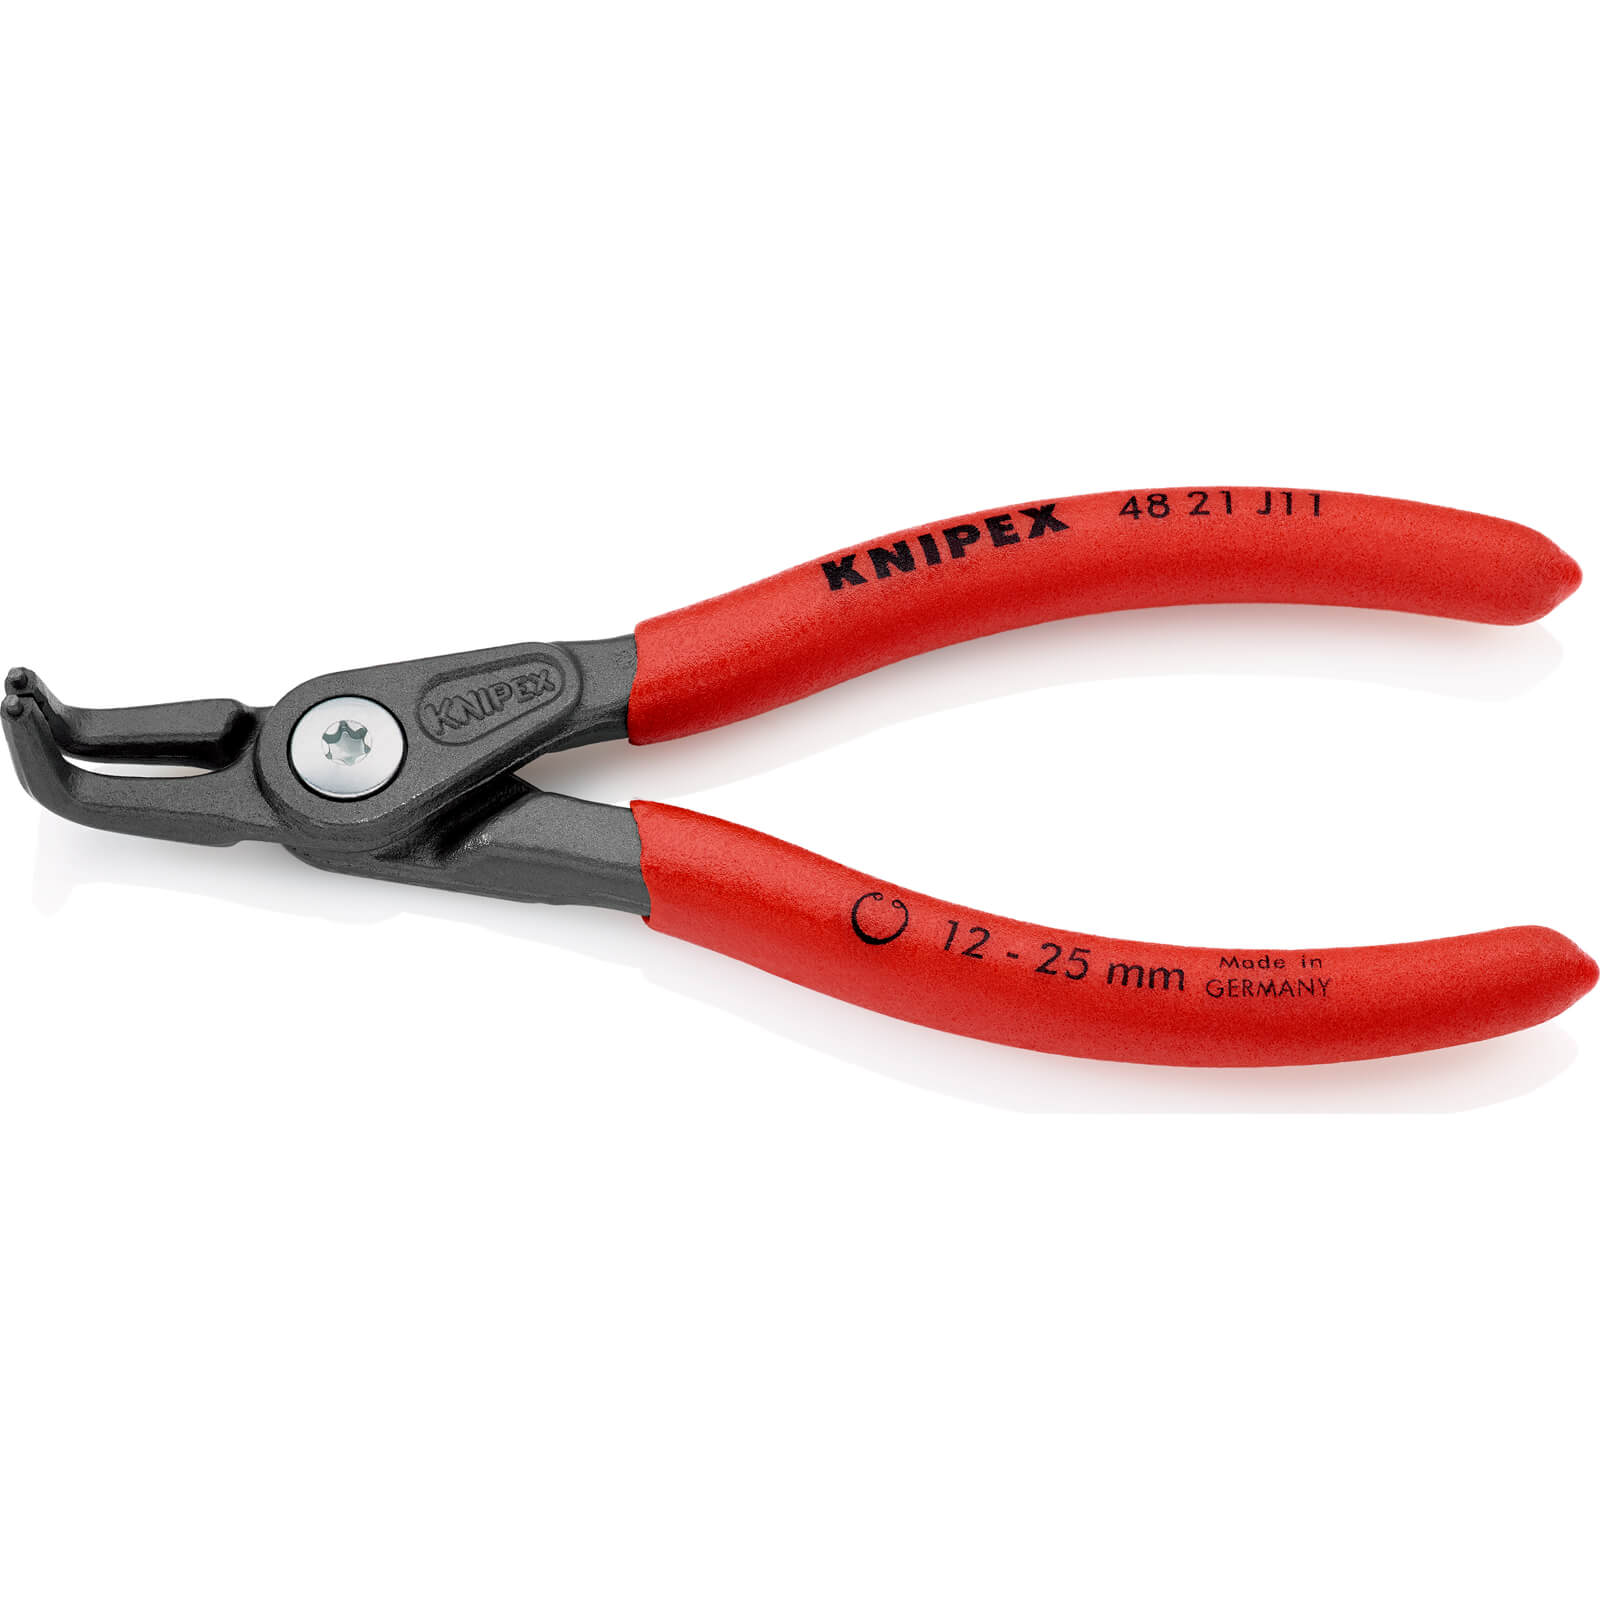 Image of Knipex 48 21 Internal 90 Degree Precision Circlip Pliers 12mm - 25mm